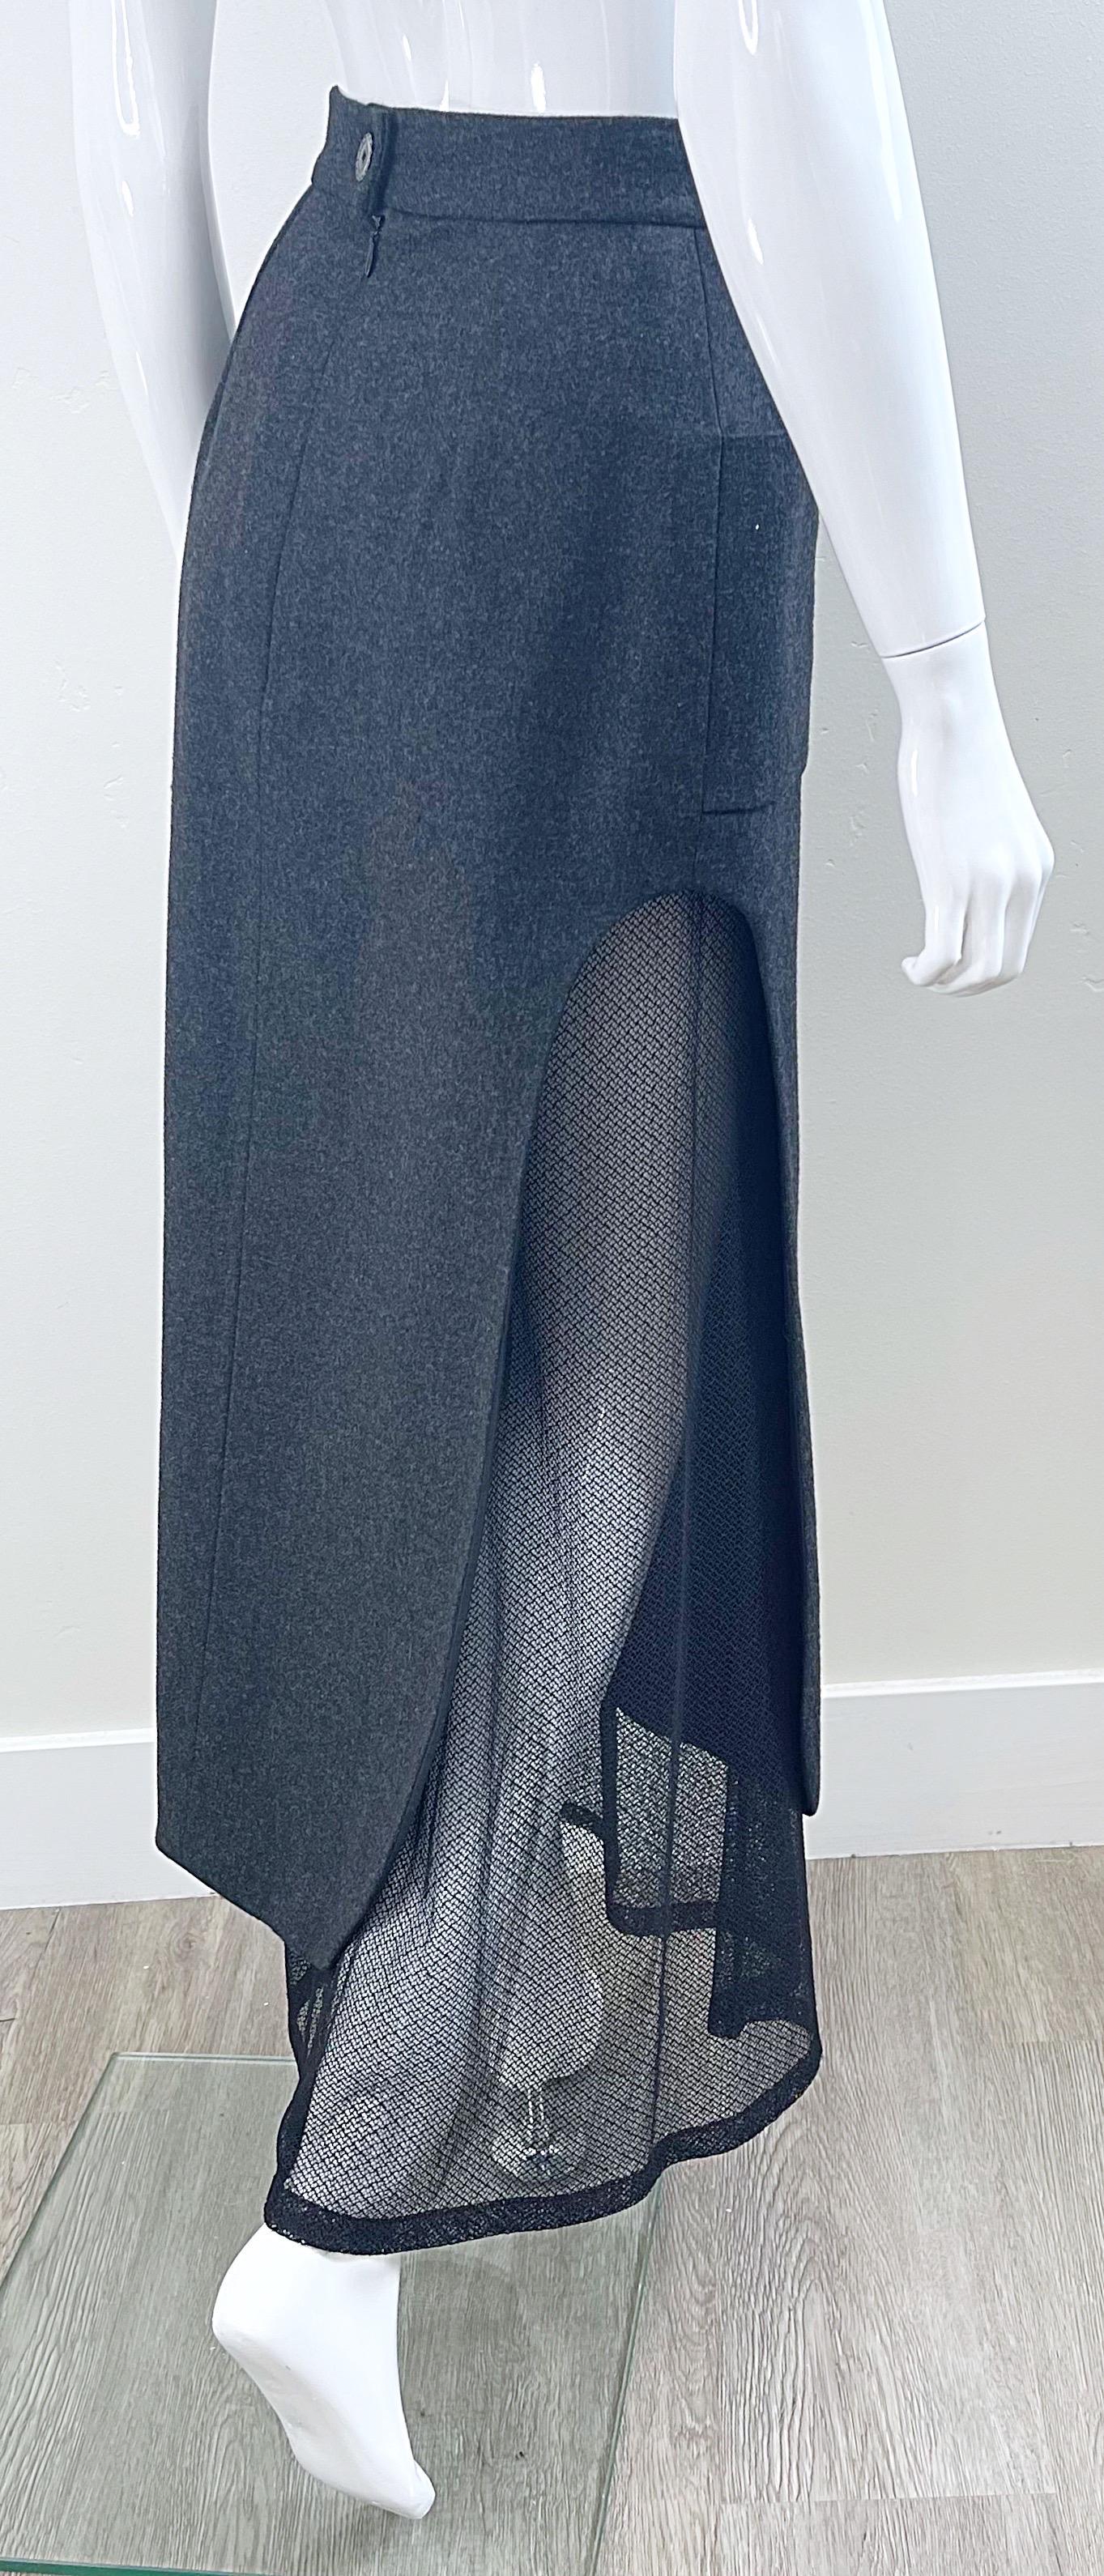 Karl Lagerfeld 1980s Grey Wool + Black Lace Vintage 80s Mini Maxi Skirt For Sale 7